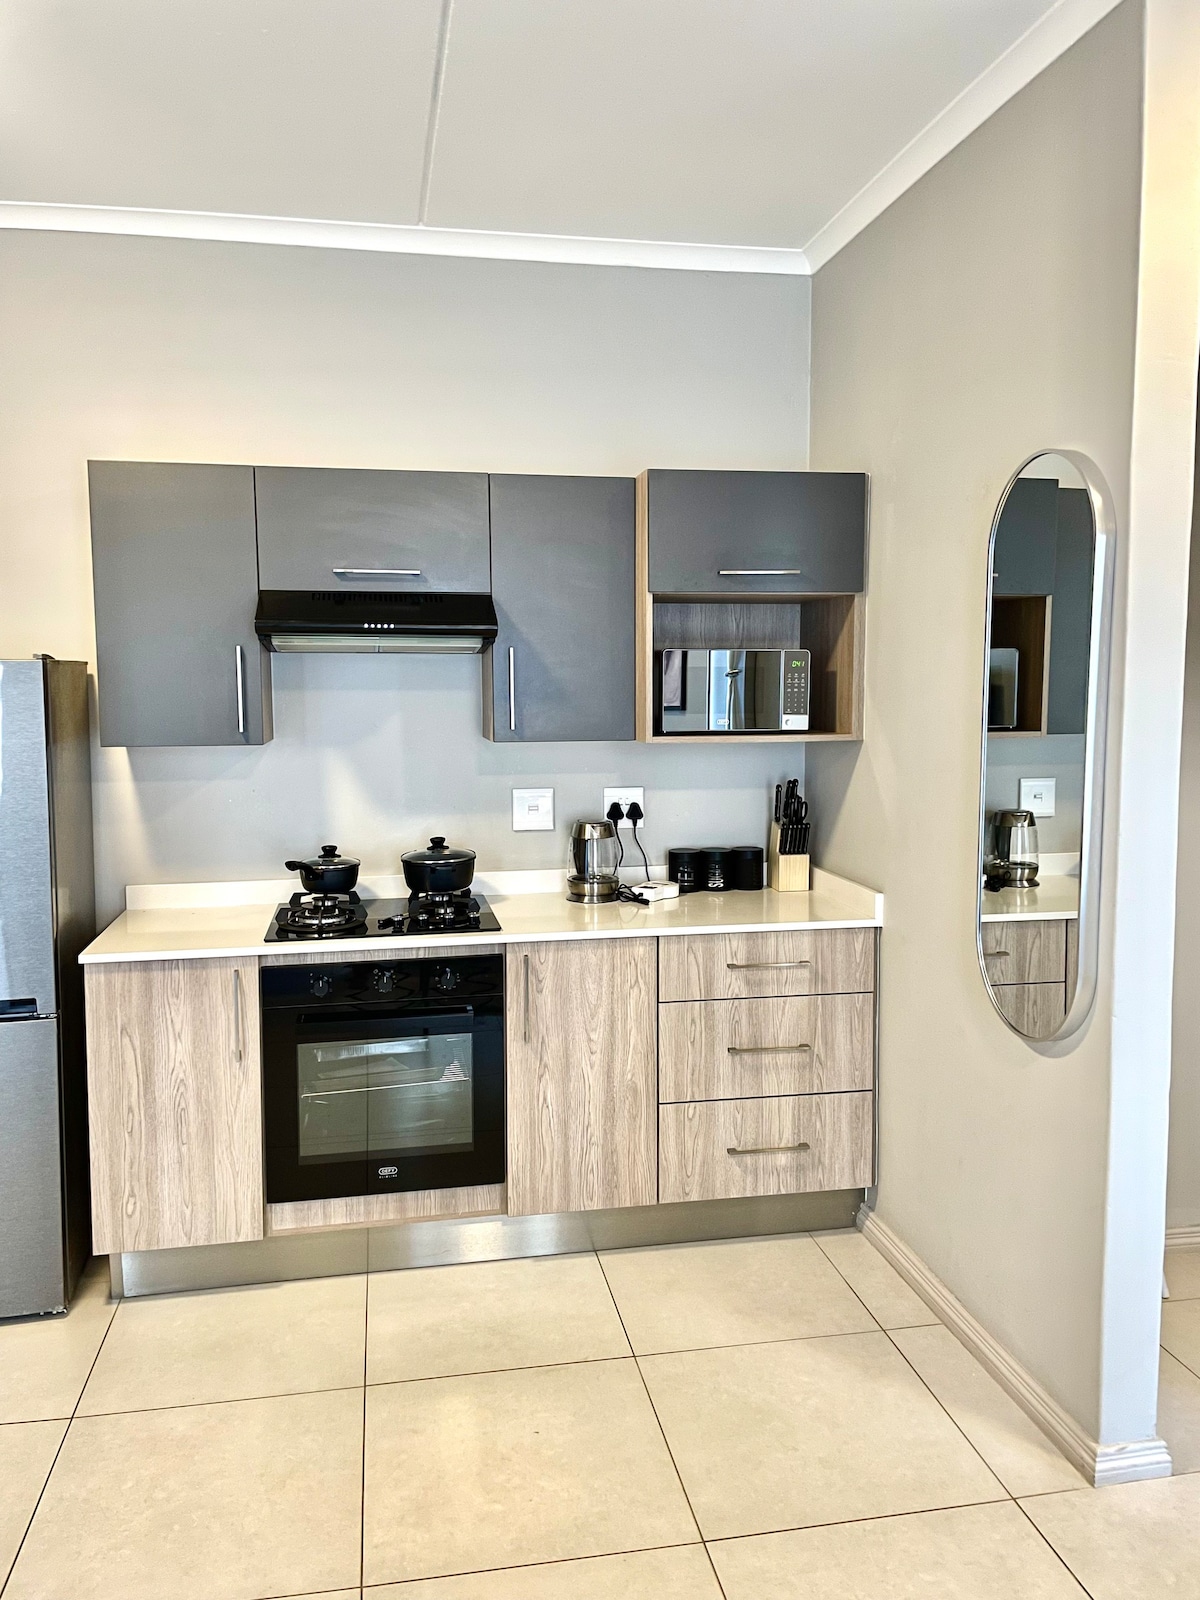 Apartment in midrand 50 on lever